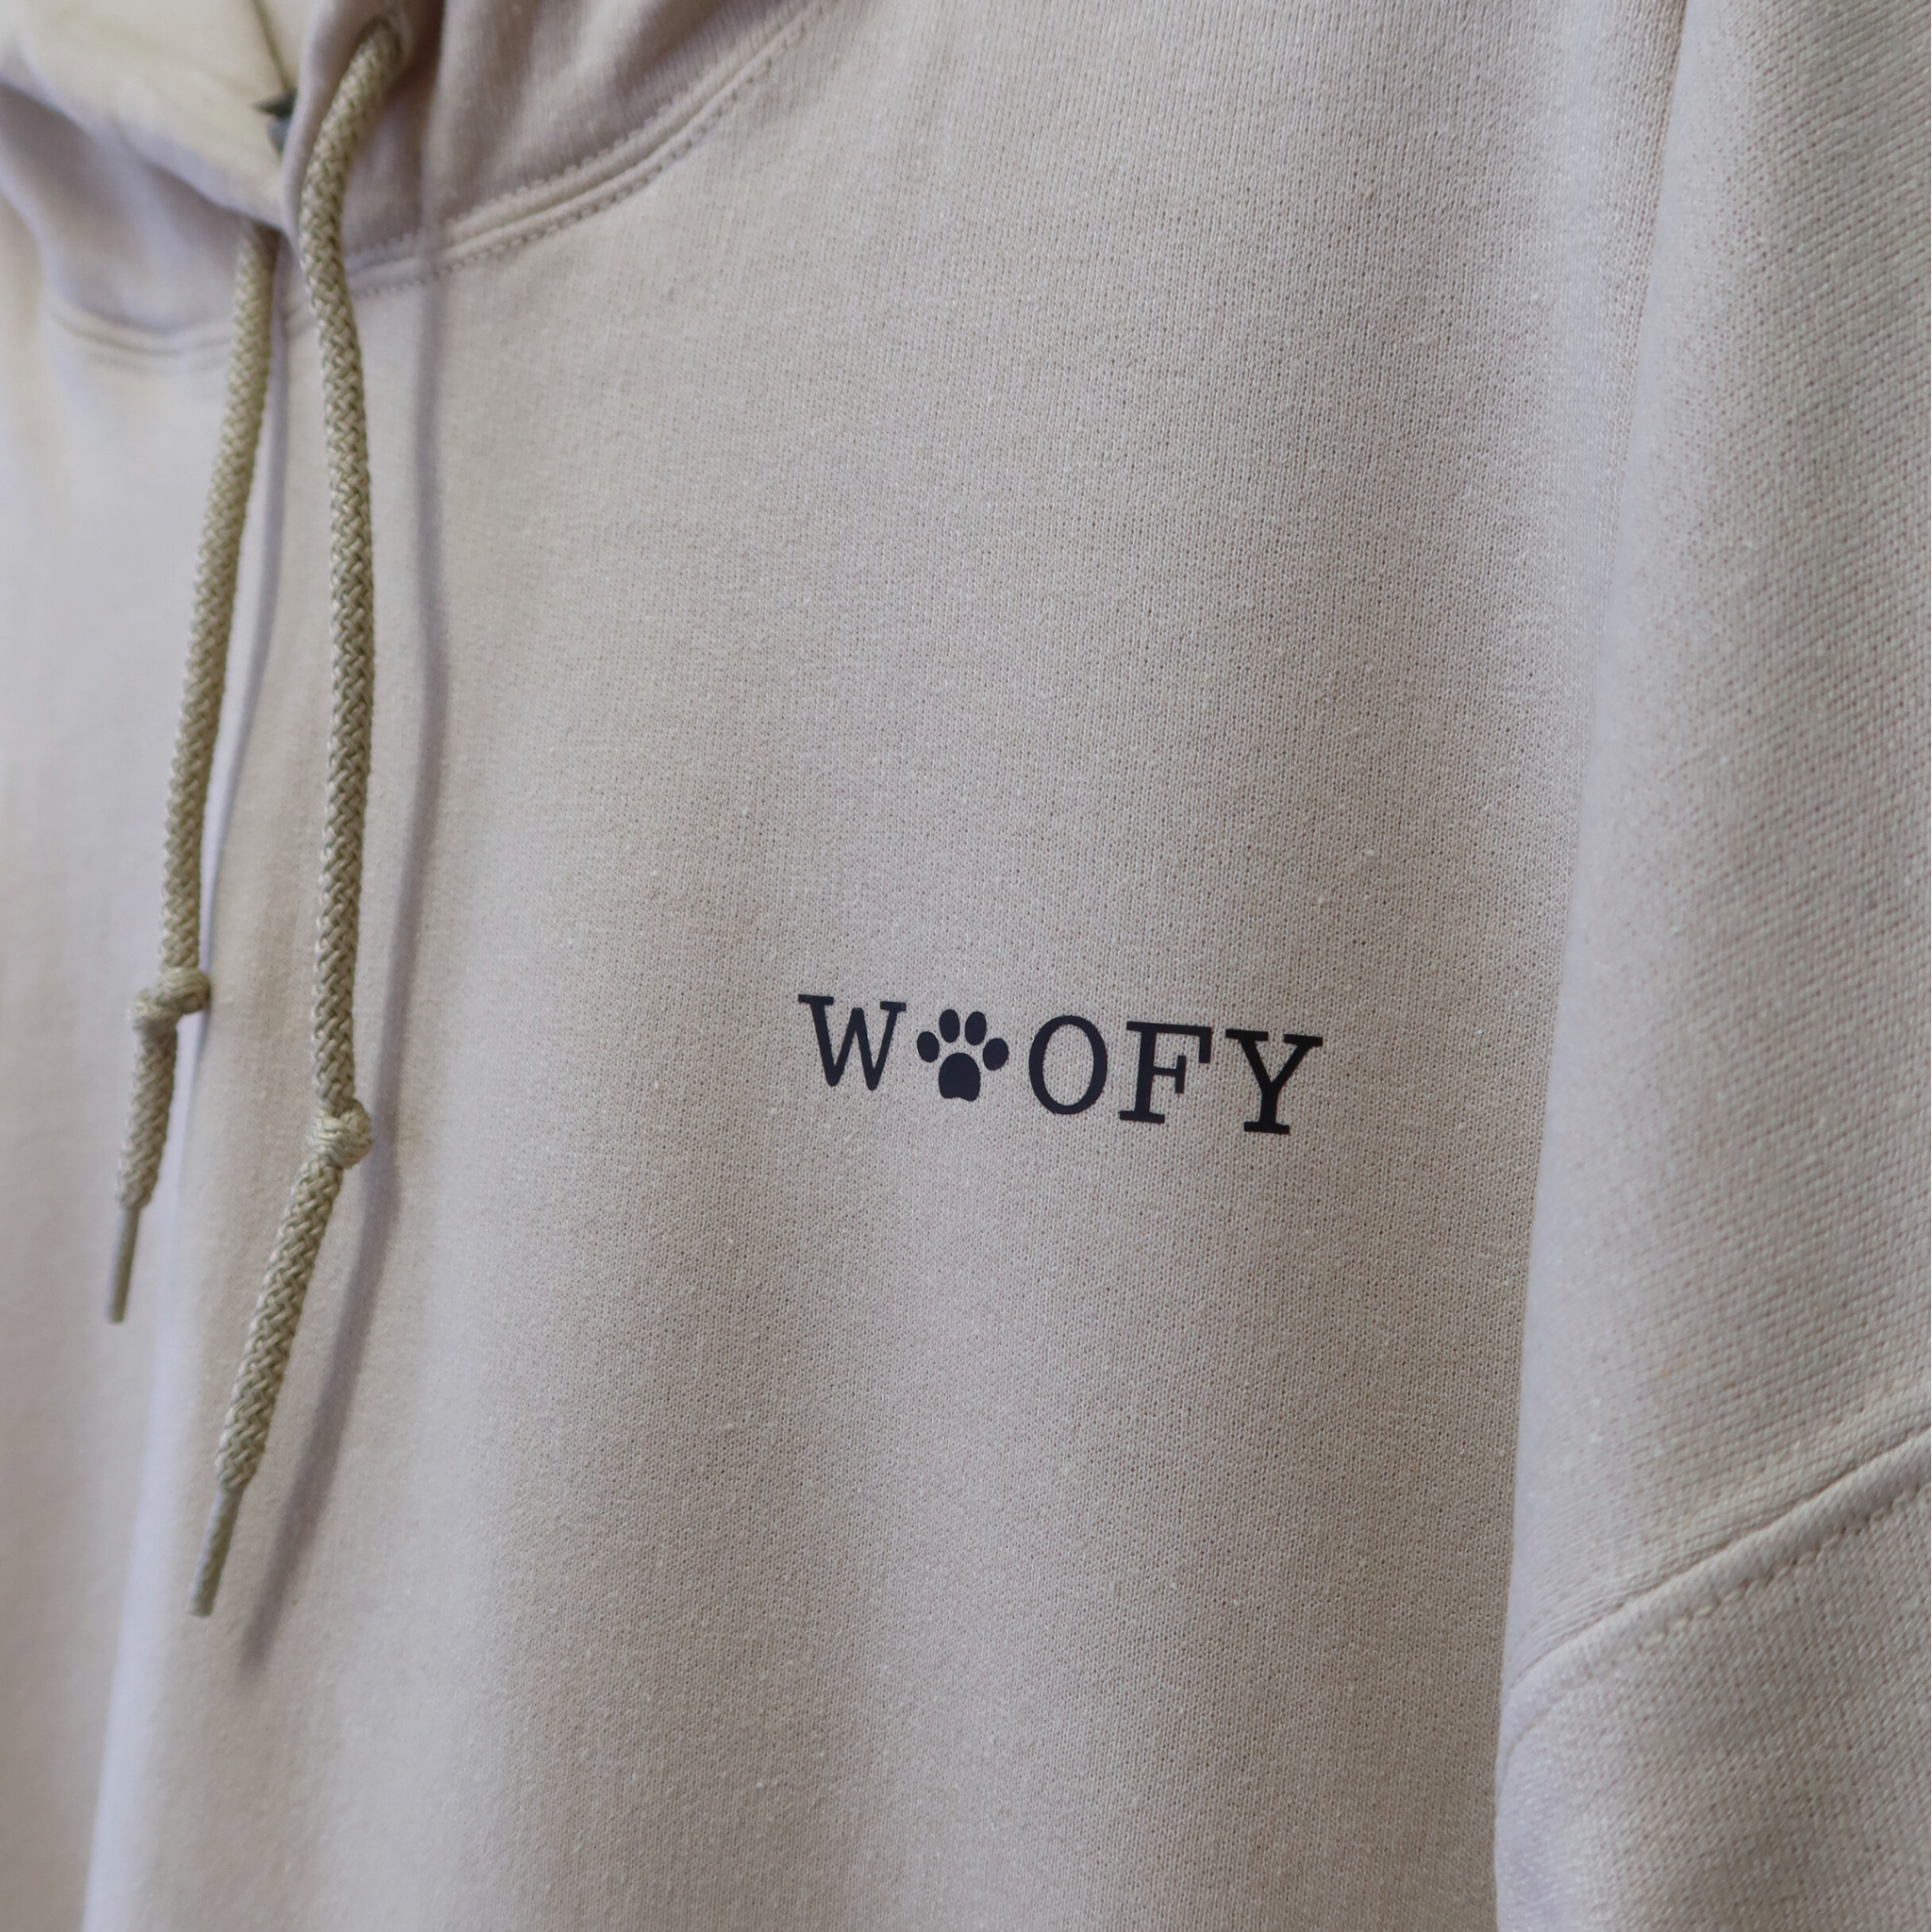 'Plans with my dog' hoodie